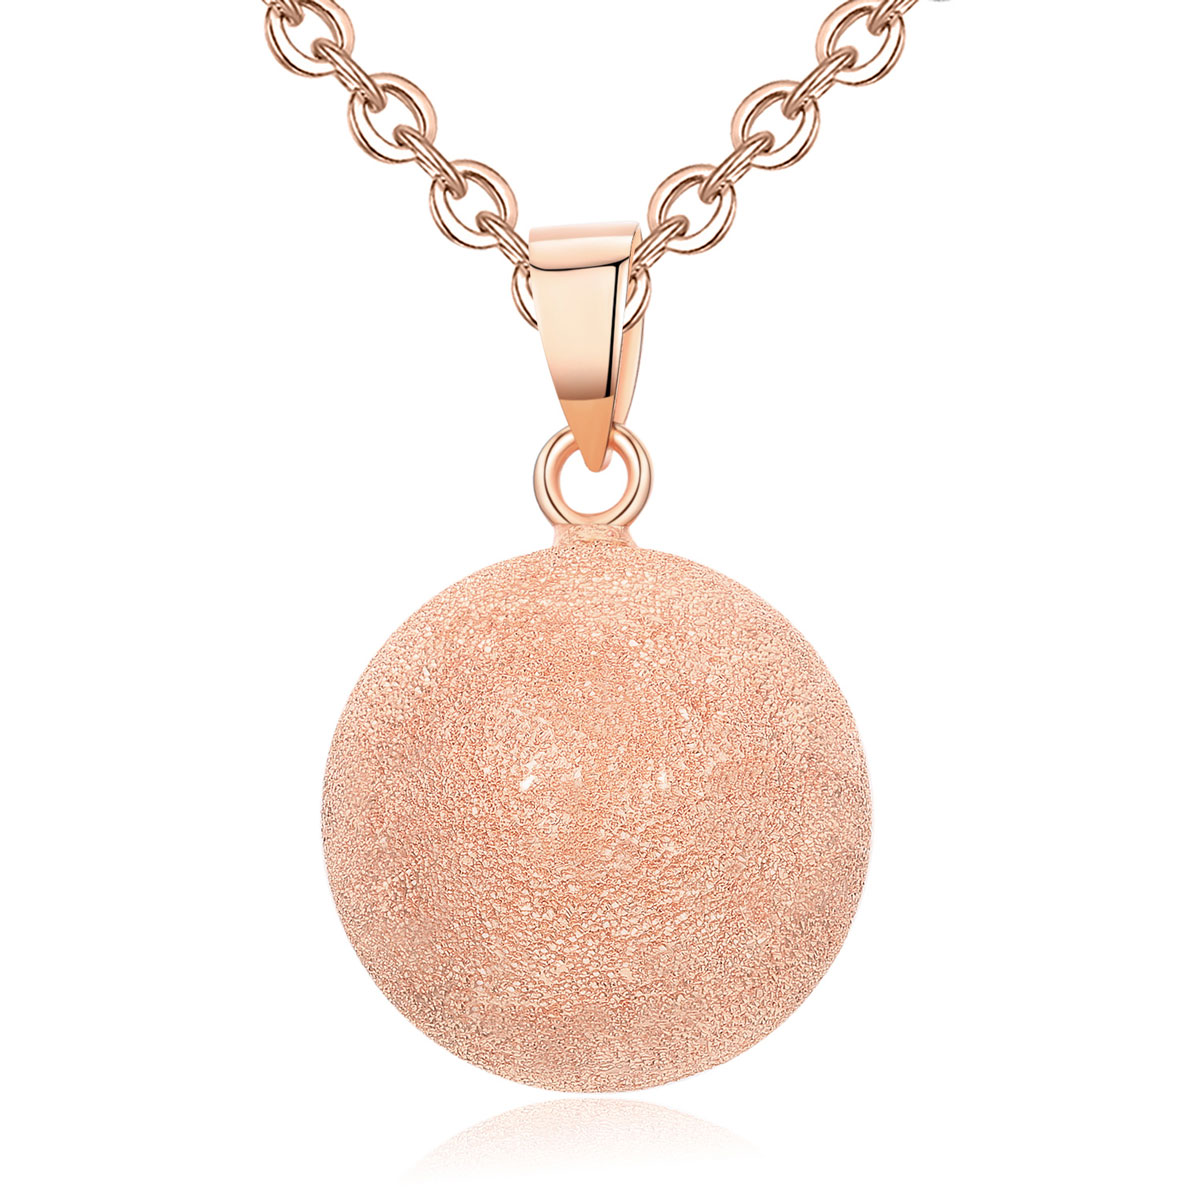 Merryshine Jewelry Wholesale Matte Rose Gold Plated Pregnancy Belly Harmony Sound Bola Ball Pendant Necklace